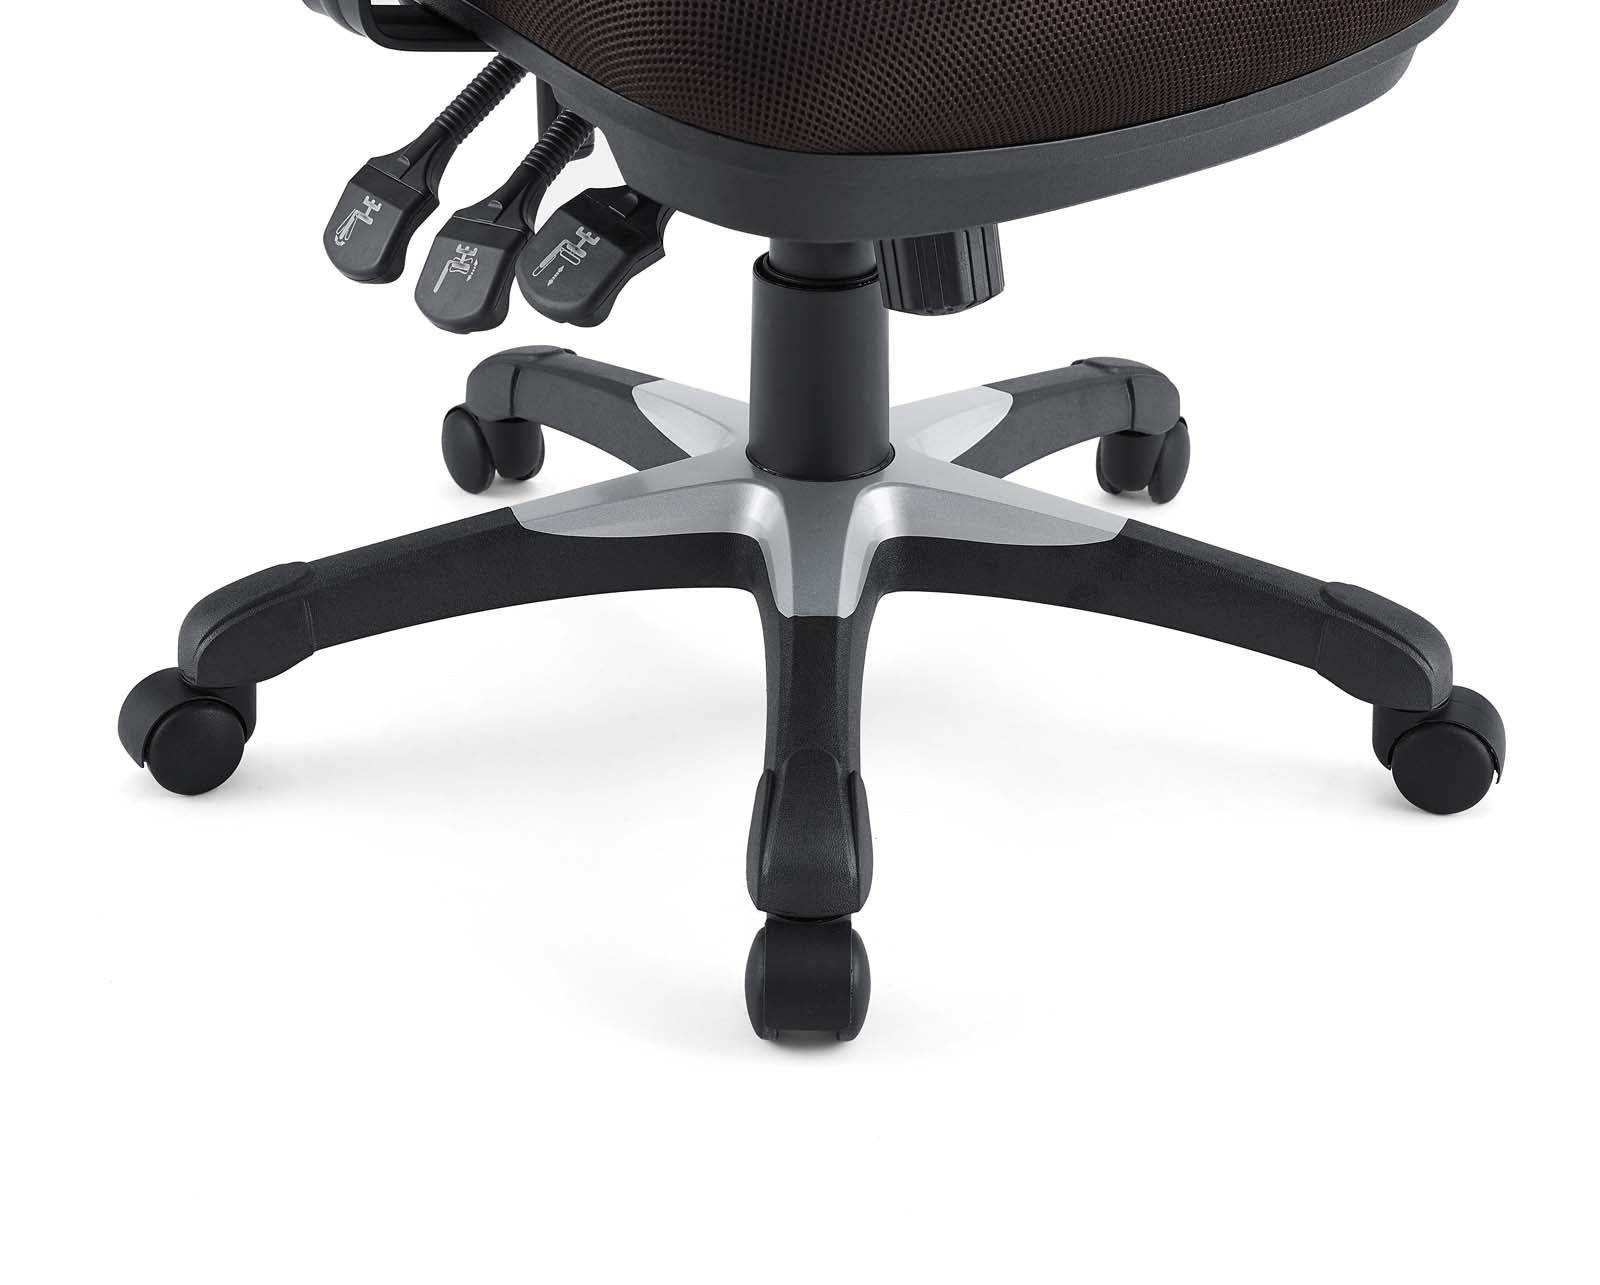 Modway Task Chairs - Articulate Office Chair Brown